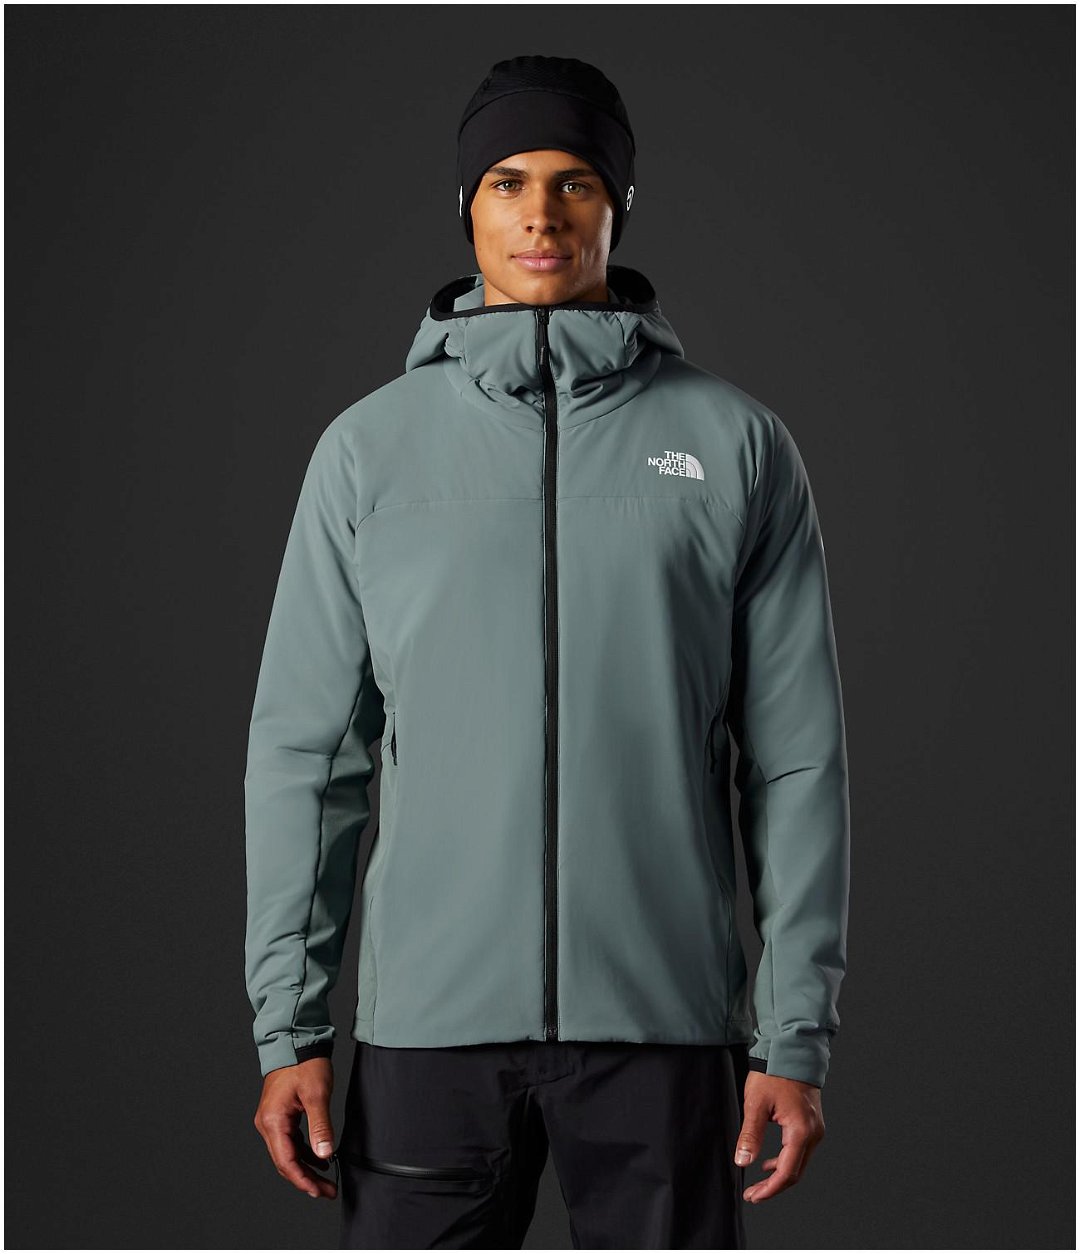 Men’s Summit Series Casaval Hybrid Hoodie by THE NORTH FACE | jellibeans